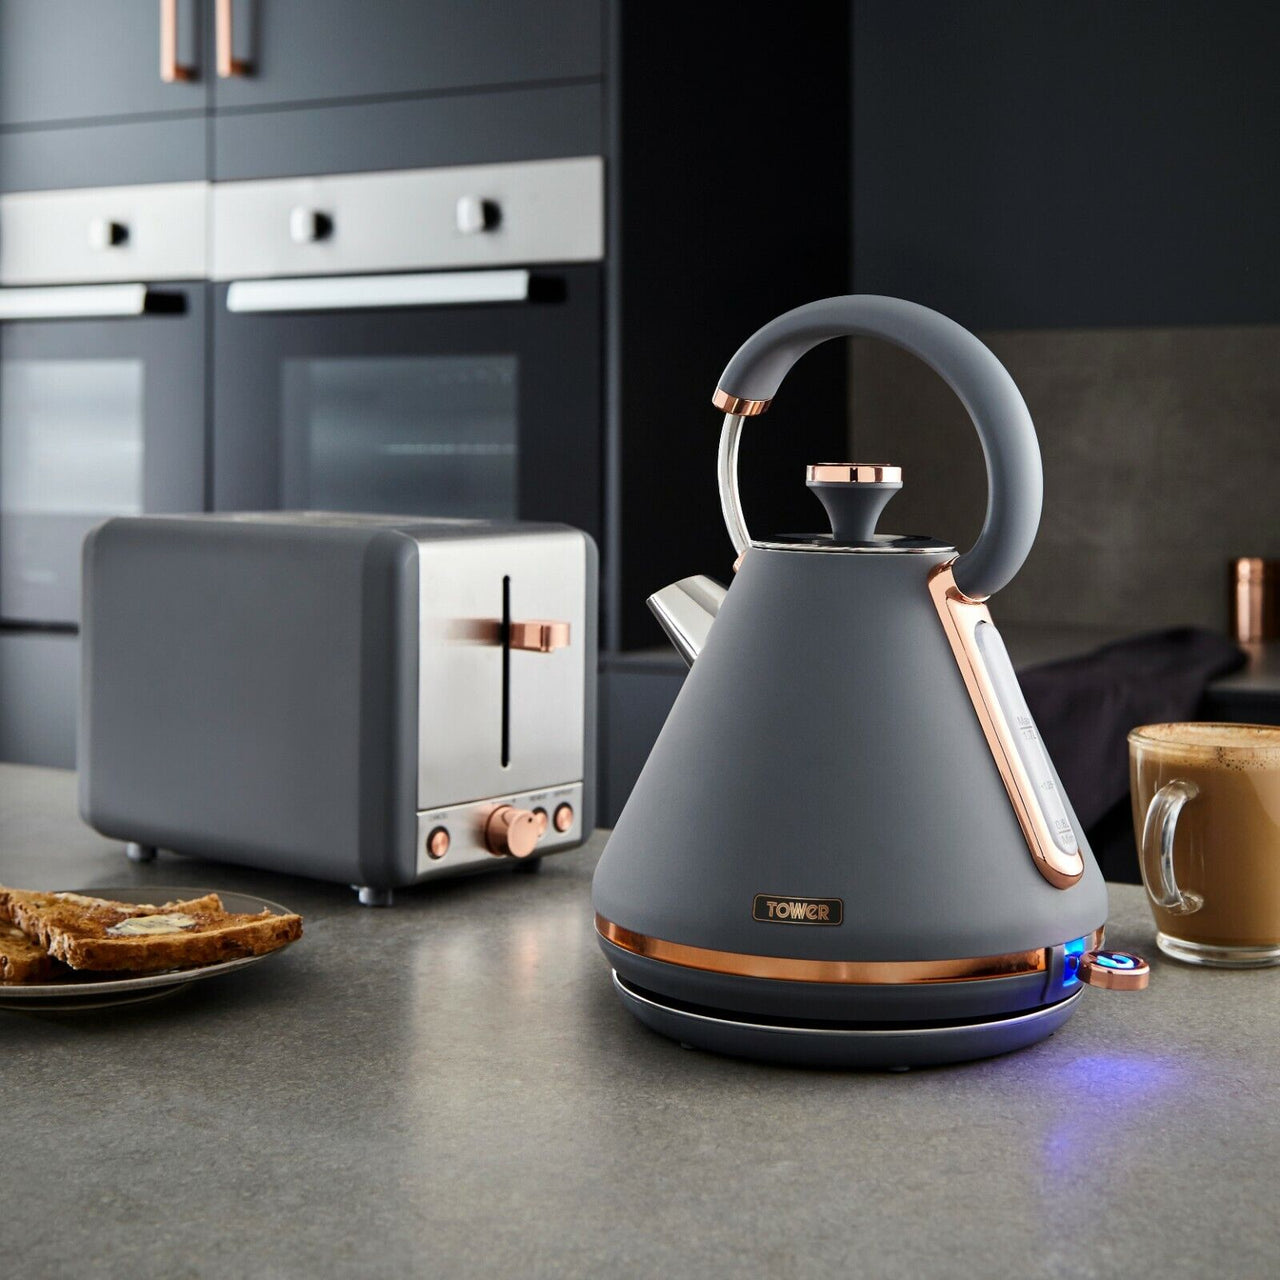 Tower Cavaletto Pyramid Kettle, Toaster, Bread Bin & Canisters Matching Set in Grey & Rose Gold